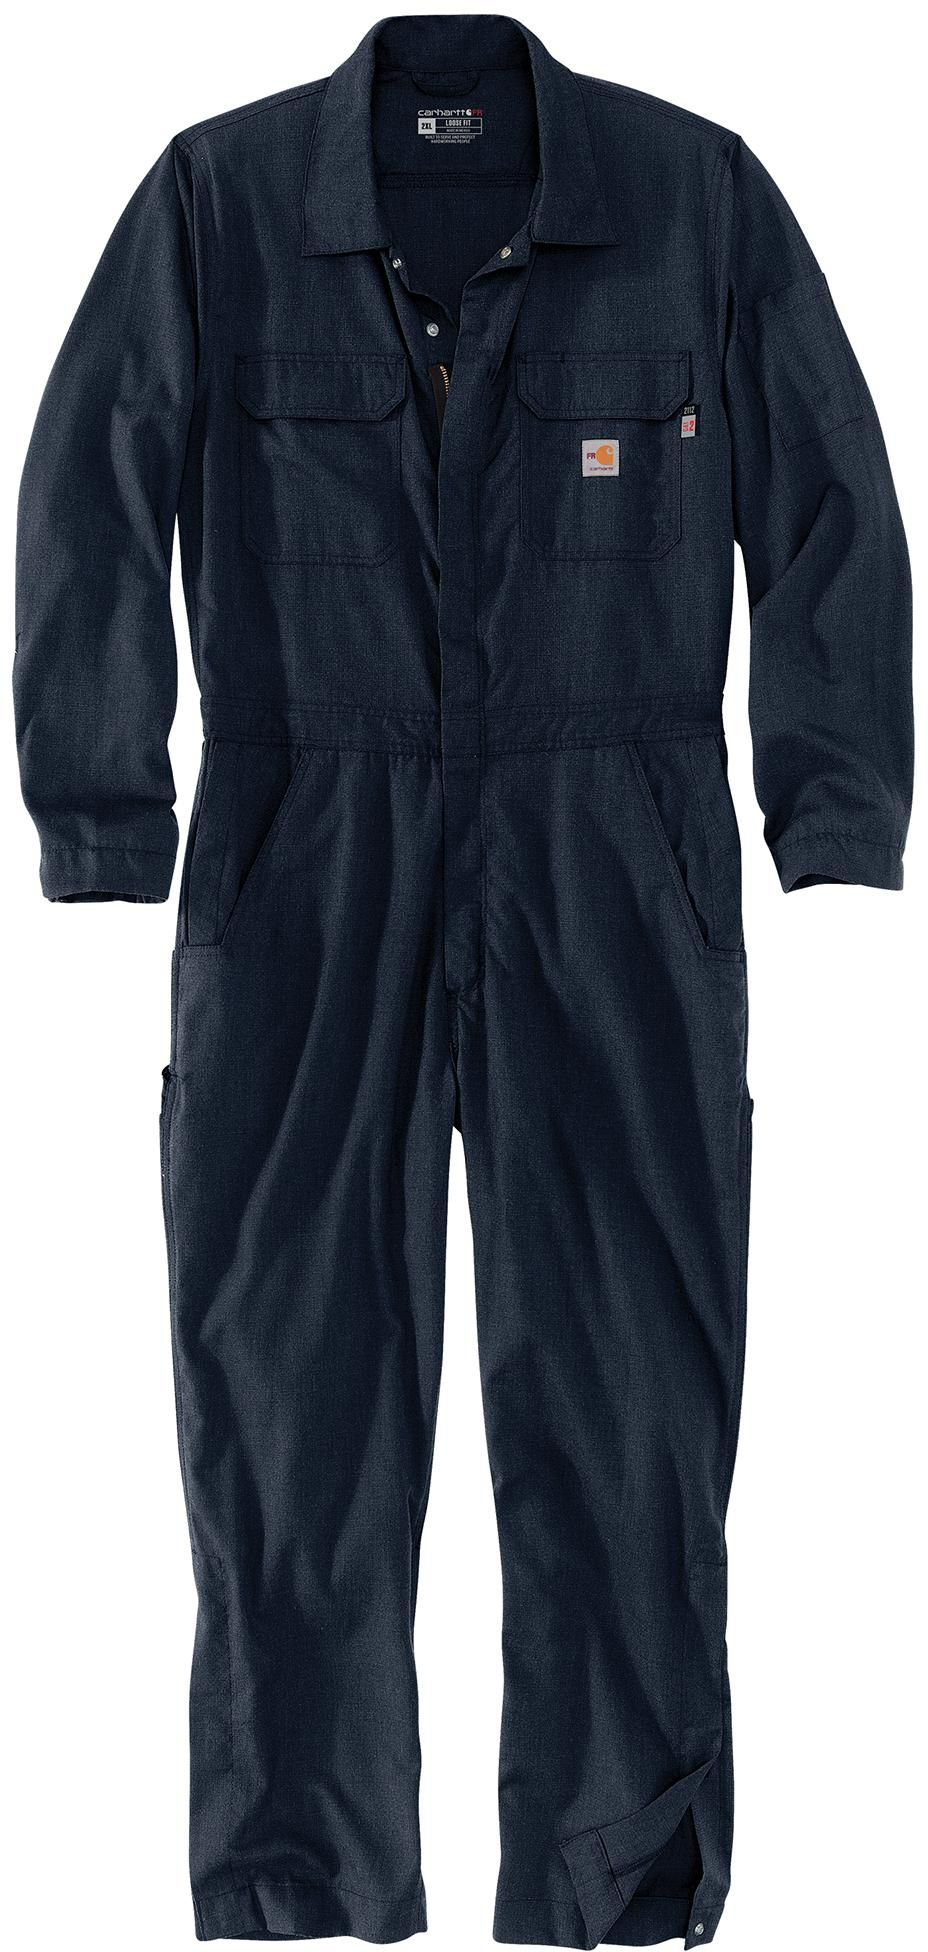 Carhartt Force Flame-Resistant Lightweight Loose-Fit Coveralls for Men - Navy - MT - Tall